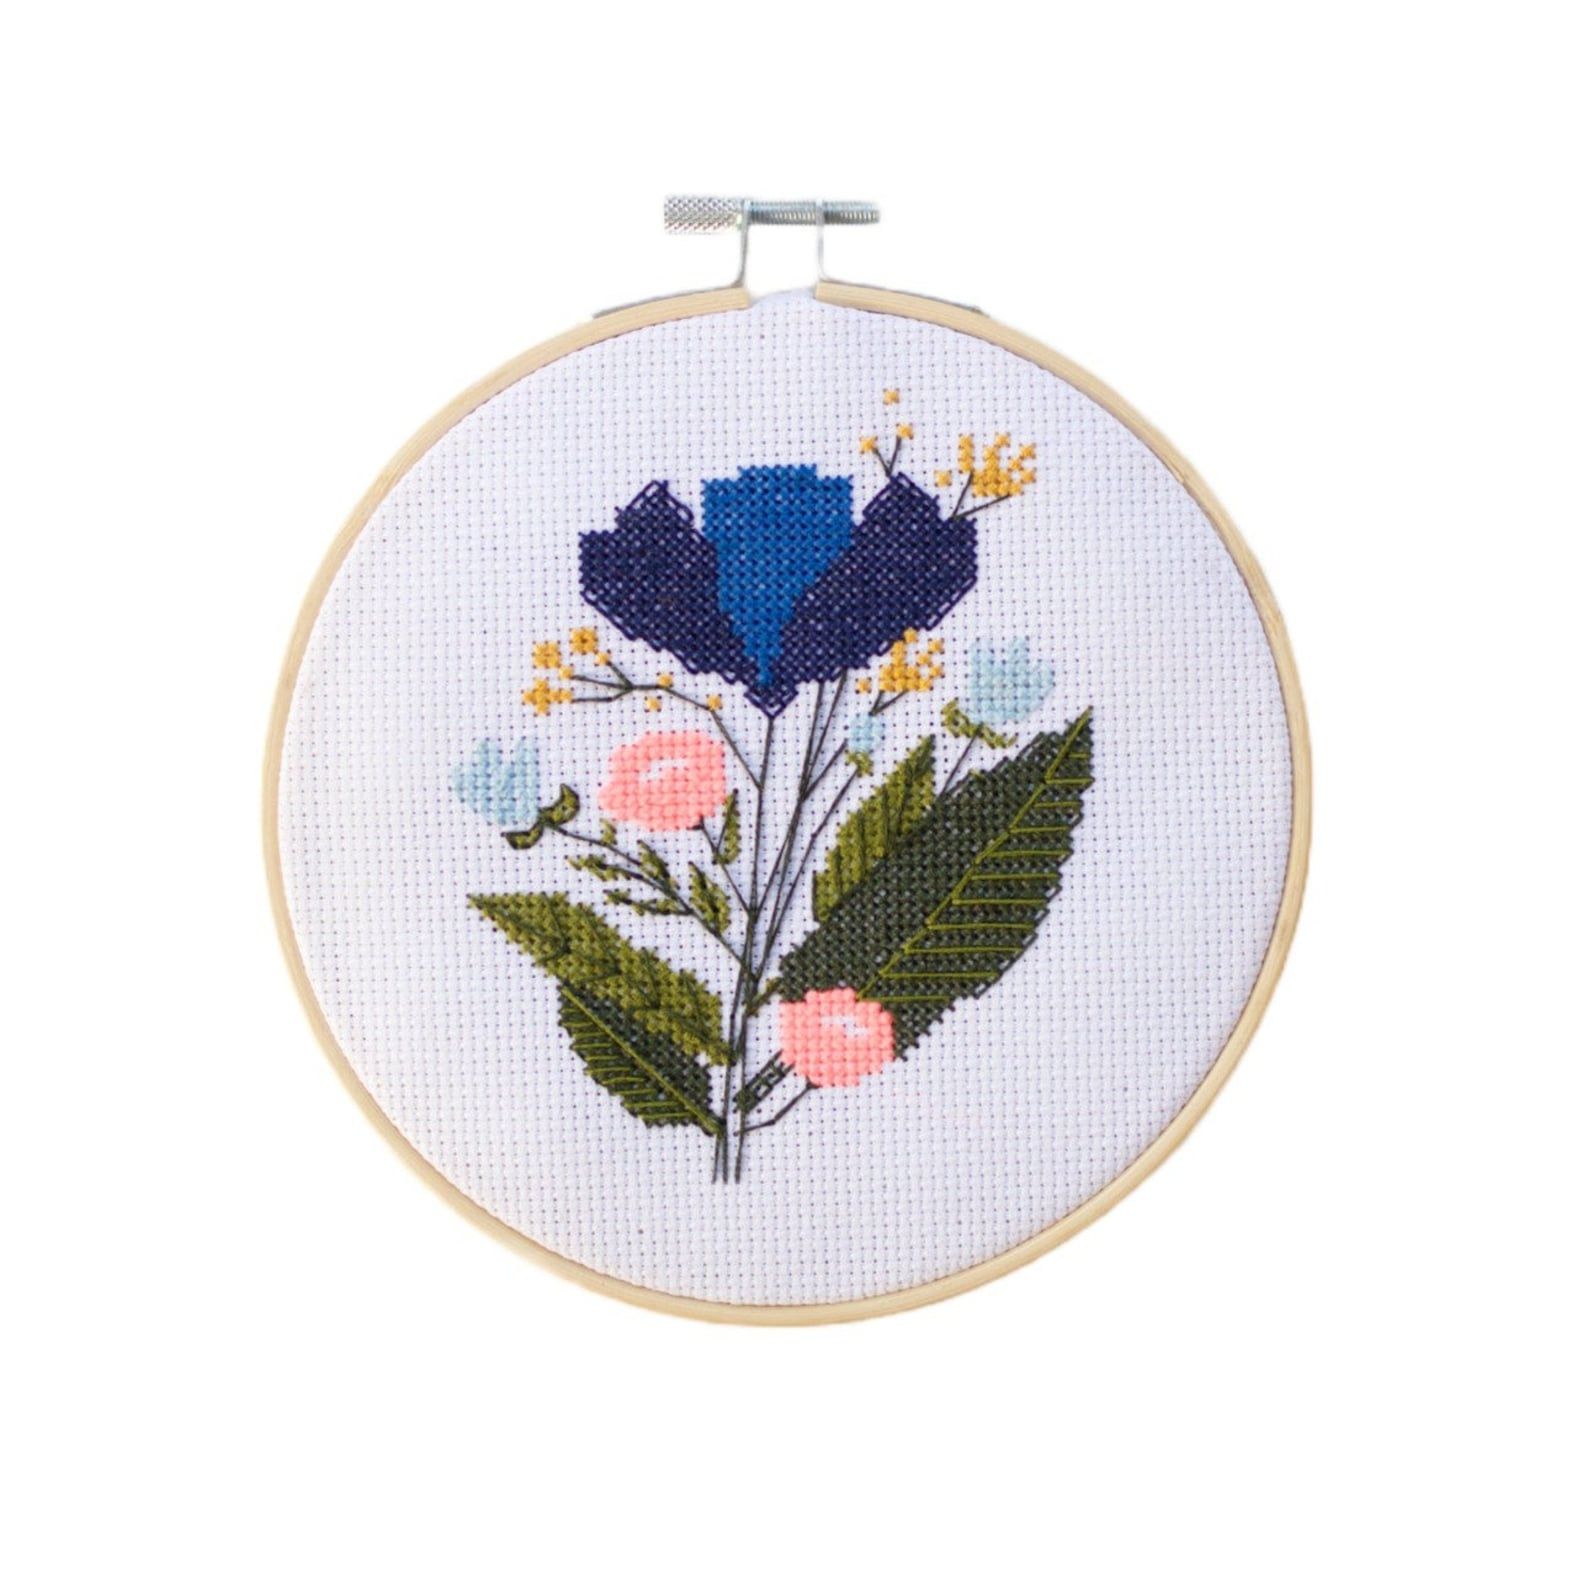 32 cross stitch kits perfect for beginners and improvers